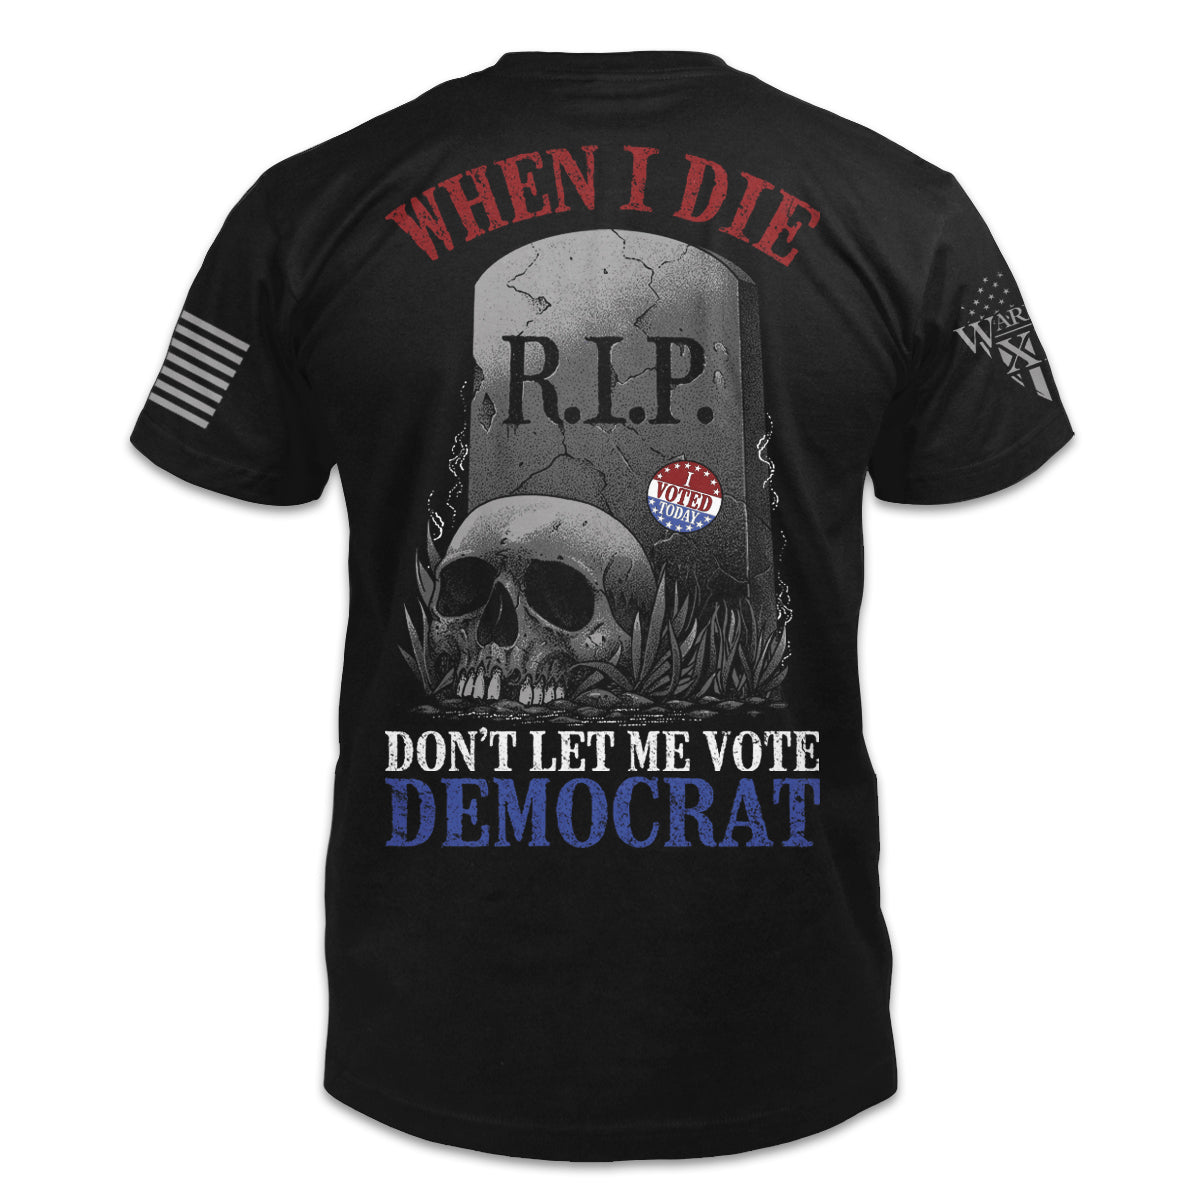 A black t-shirt with the words "When I die, don't let me vote Democrat" with a gravestone and a skull printed on the back of the shirt.